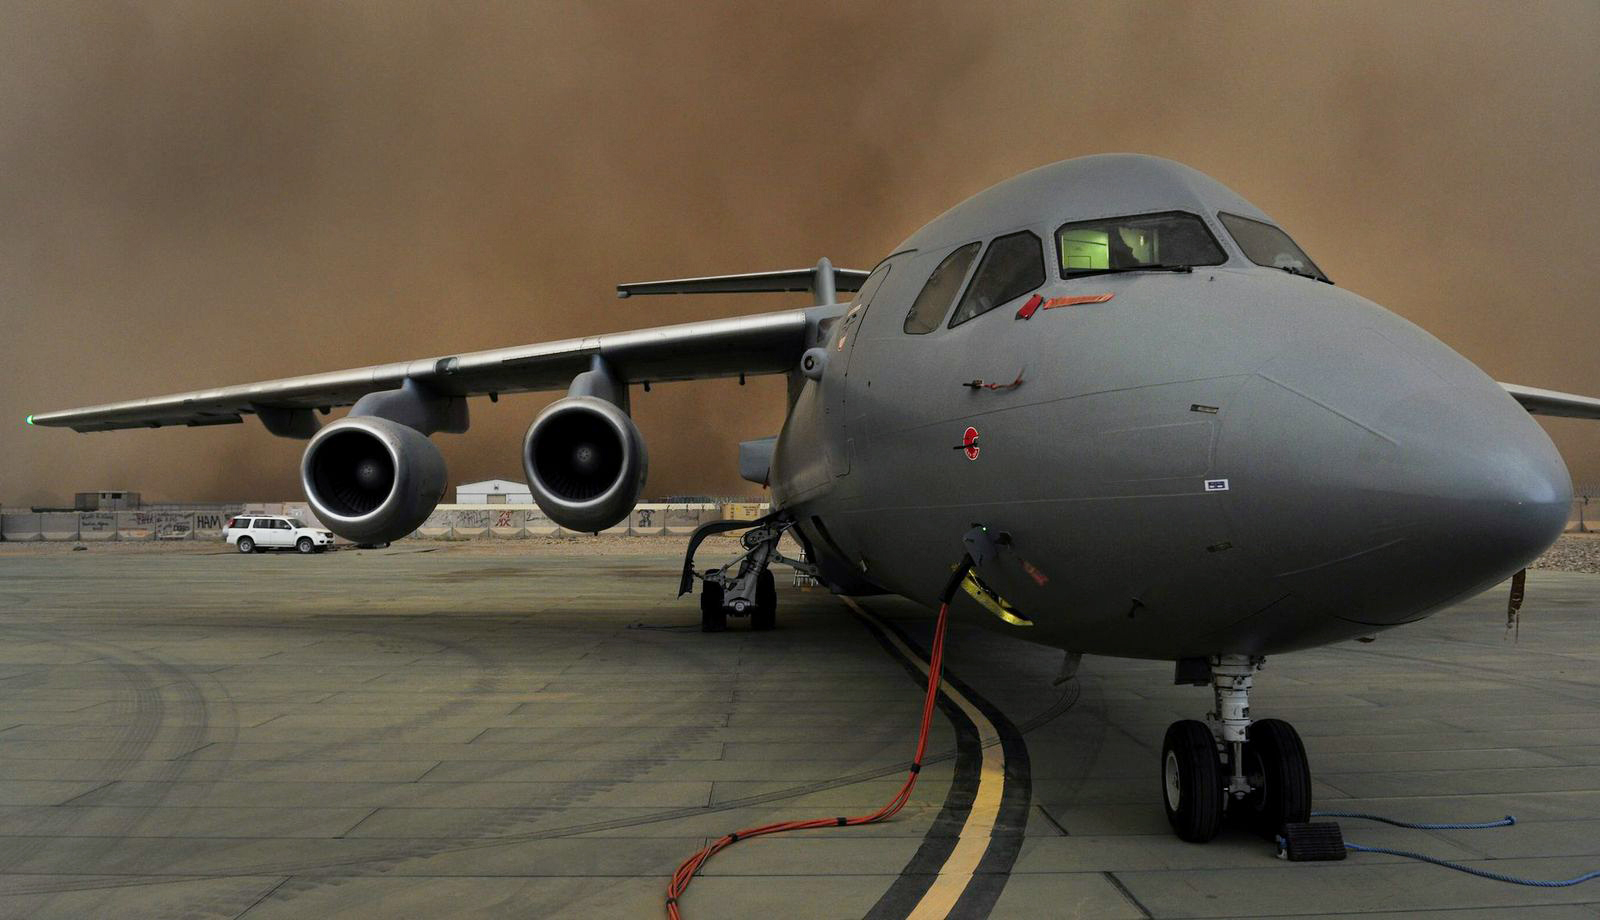 Nose shot of BAe146 aircraft on the airfield with smoke behind it.